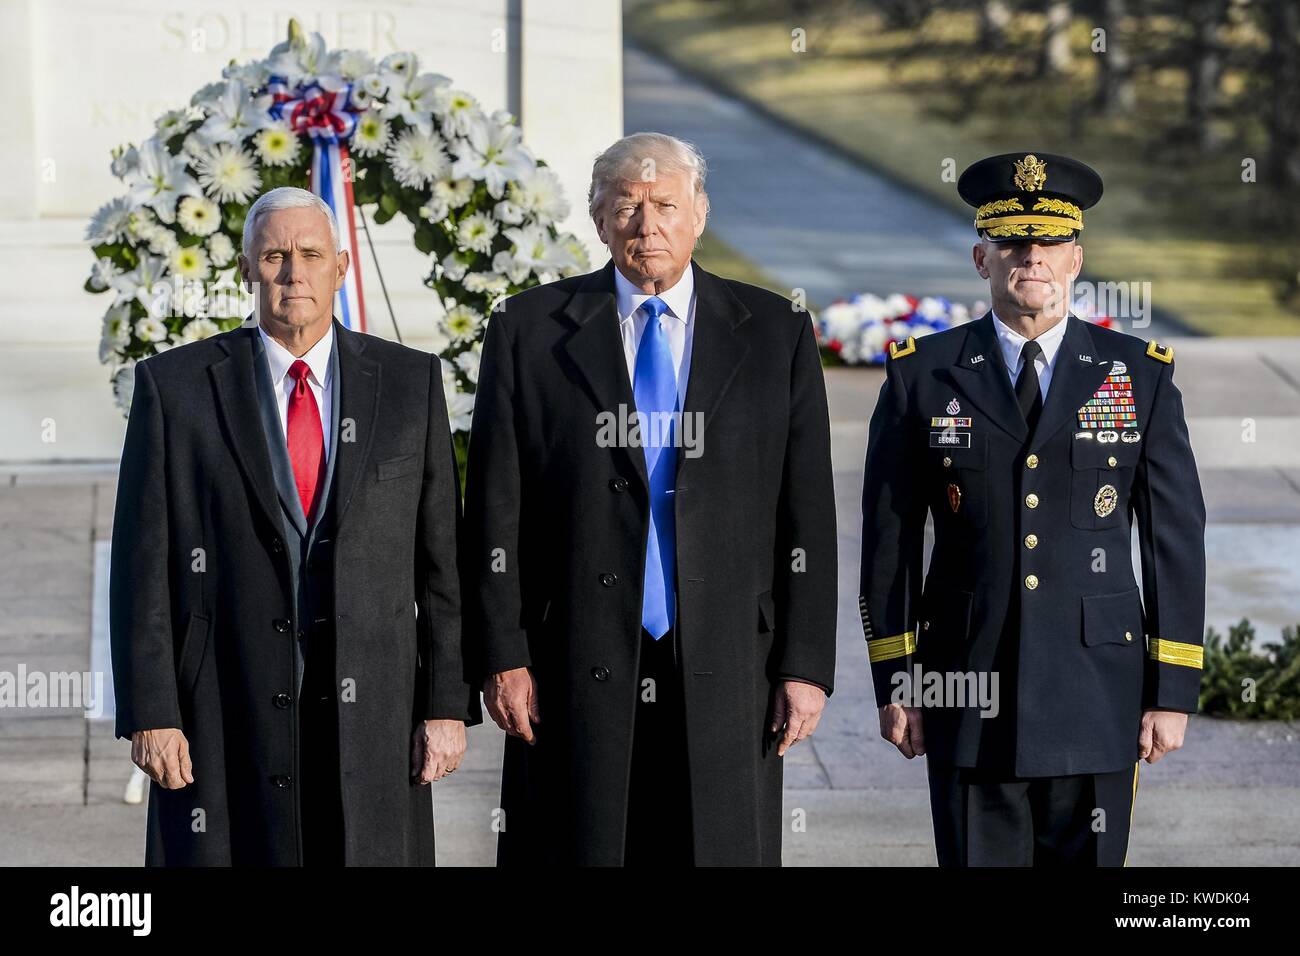 President-elect Donald Trump, VP-elect Michael Pence, and Army Maj. Gen. Bradley Becker. On Jan. 19, 2017 they performed the Inaugural Wreath Ceremony at the Tomb of the Unknown Soldier in Arlington National Cemetery (BSLOC 2017 18 120) Stock Photo